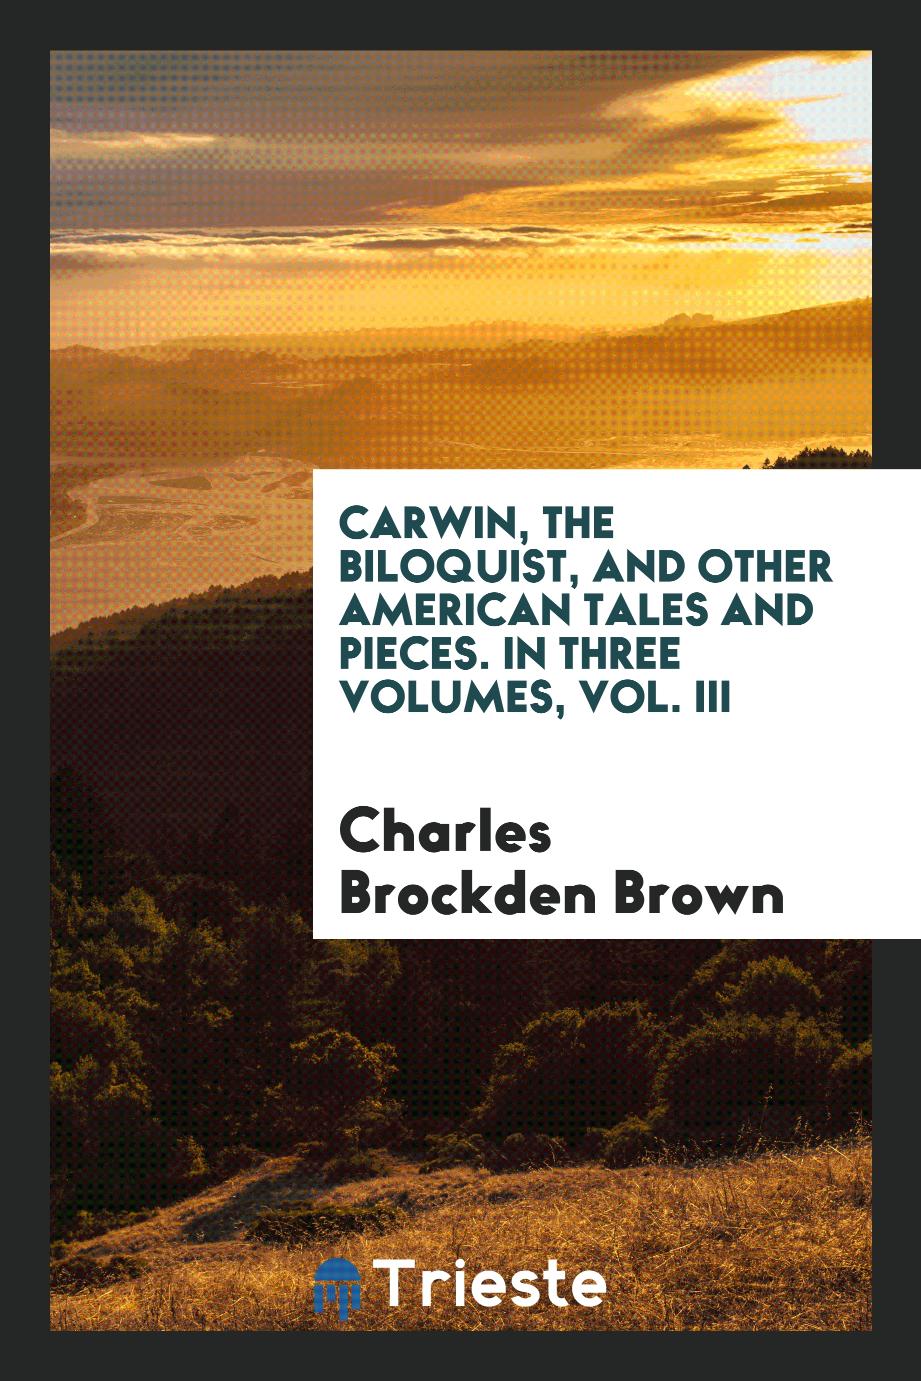 Carwin, the Biloquist, and Other American Tales and Pieces. In Three Volumes, Vol. III